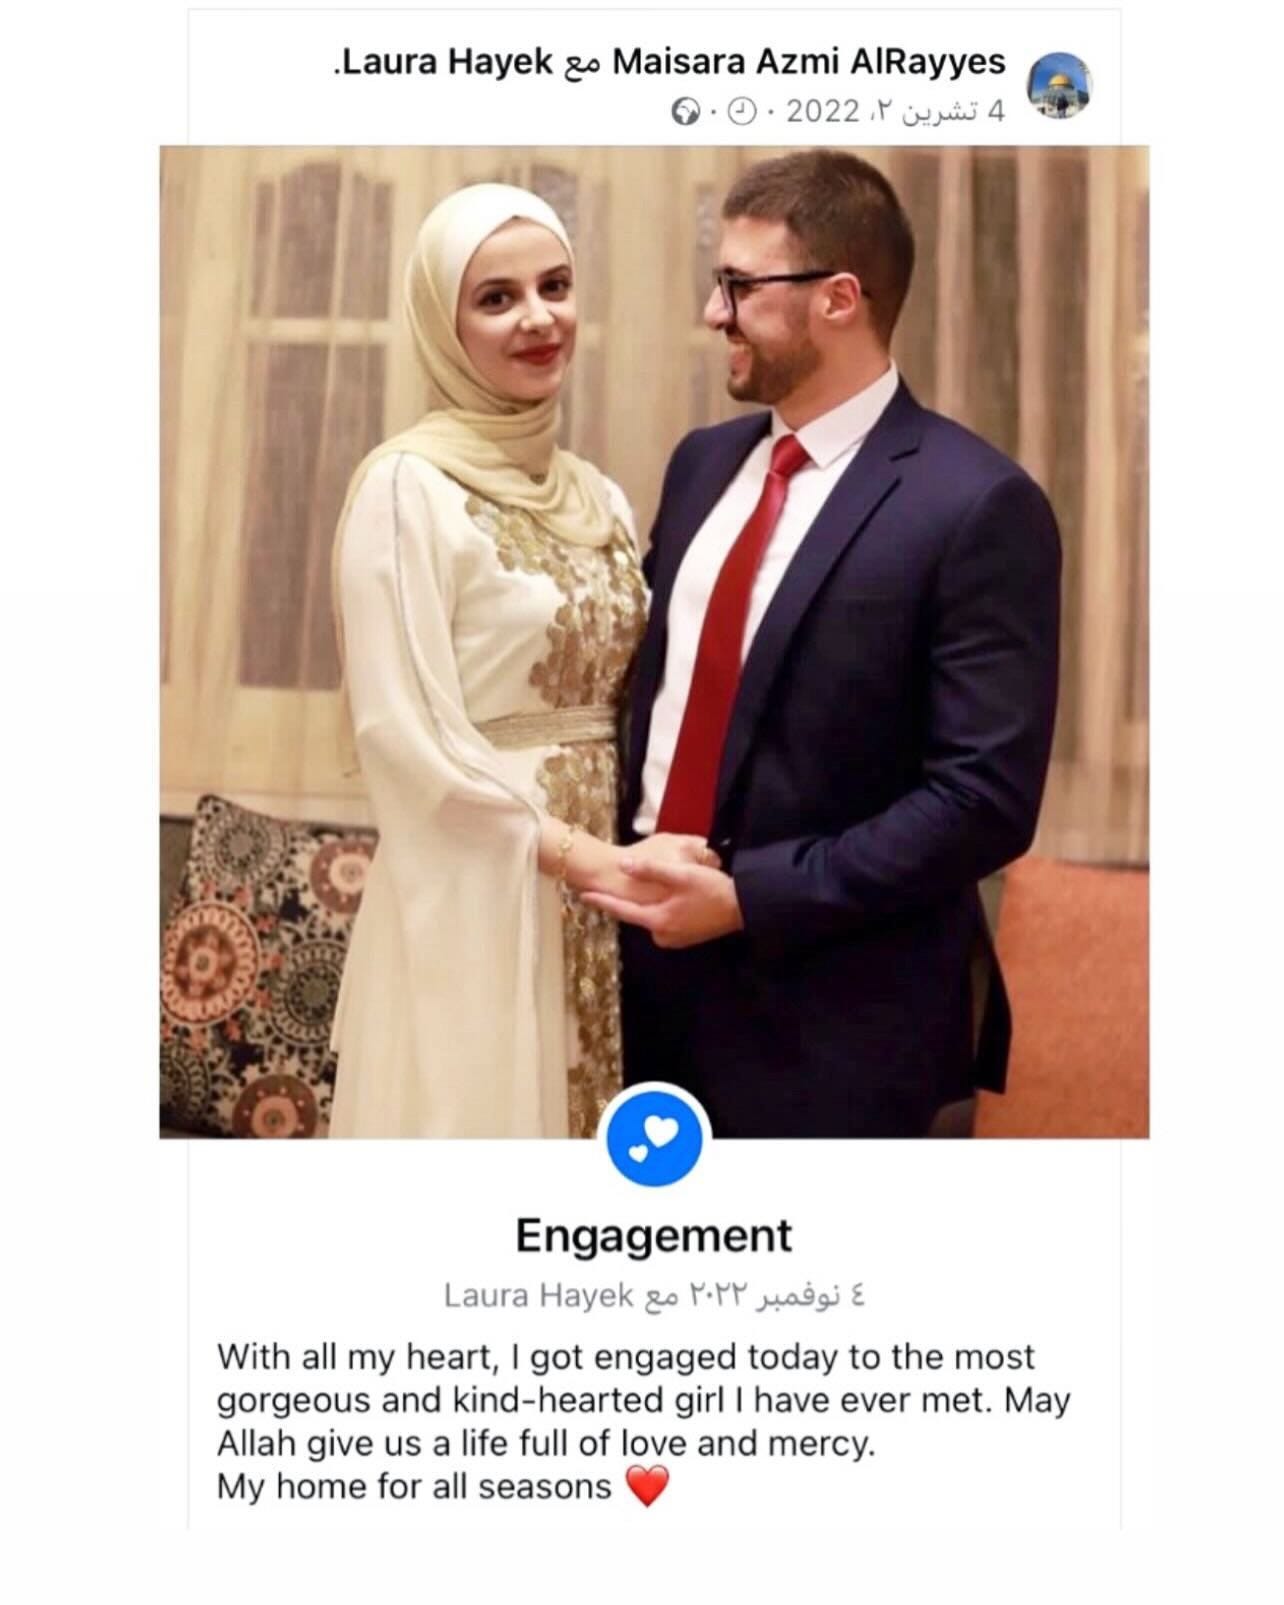 Photo by Wissam Nassar on November 07, 2023. May be an image of ‎2 people, wedding and ‎text that says '‎.Laura Hayek مع Maisara Azmi AlRayyes 2022 ٢ تشرین 4 Engagement Laura Hayek مع ۲۲۲۲ نوفمبر ٤ With all my heart, got engaged today to the most gorgeous and kind-hearted girl have ever met. May Allah give us a life full of love and mercy. My home for all seasons‎'‎‎.